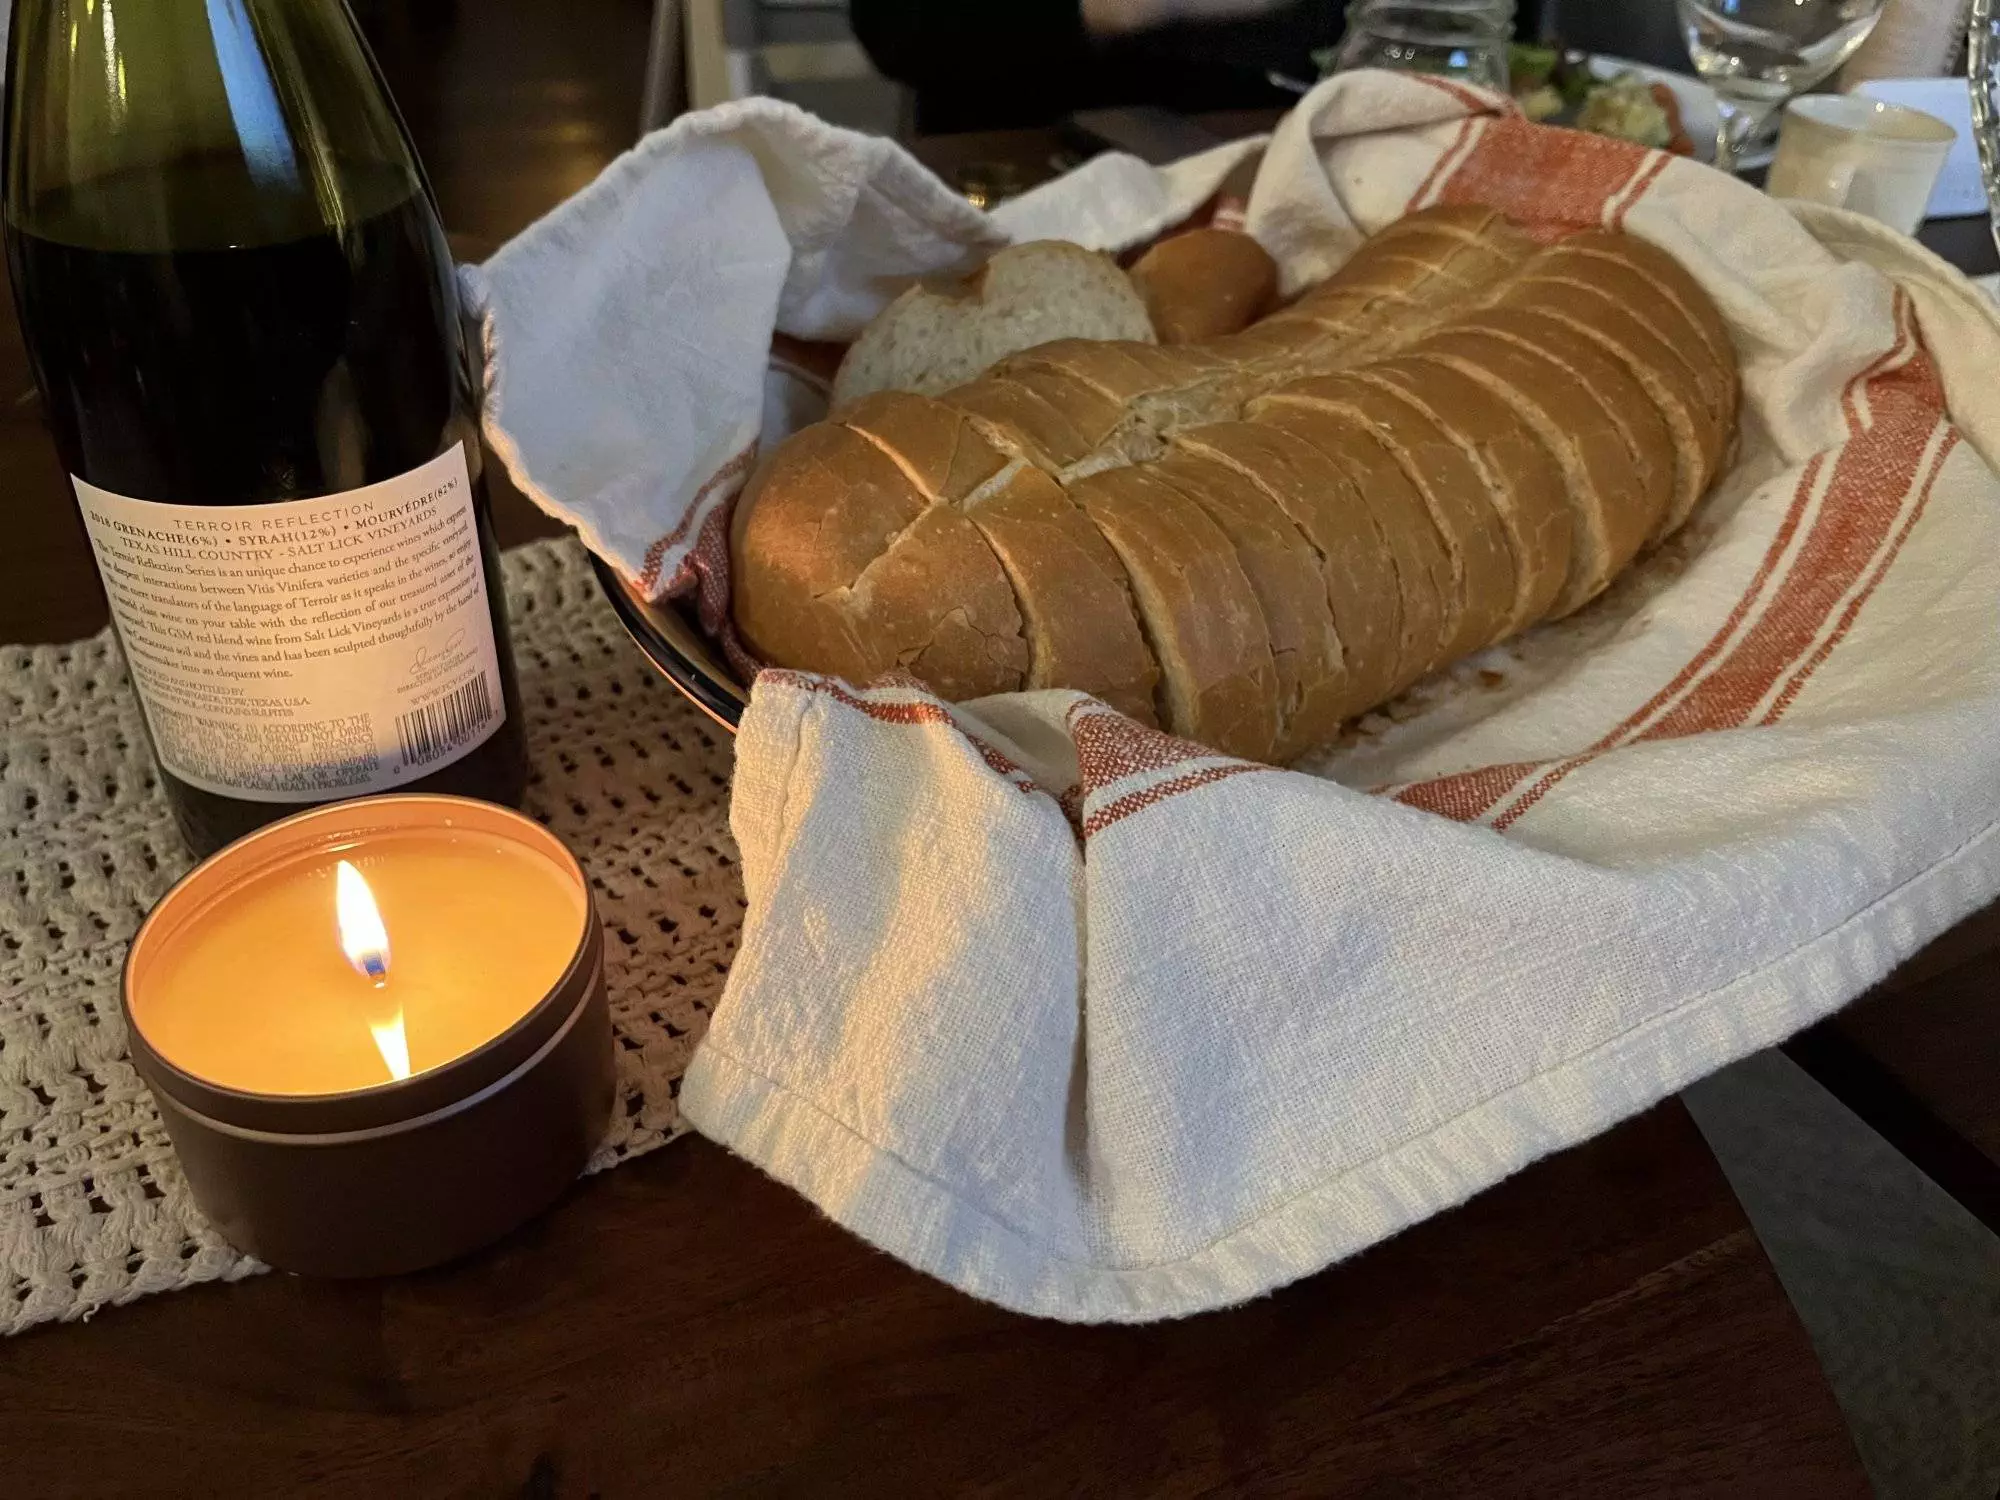 Angled View of a Bread Loaf, wine and a candle.